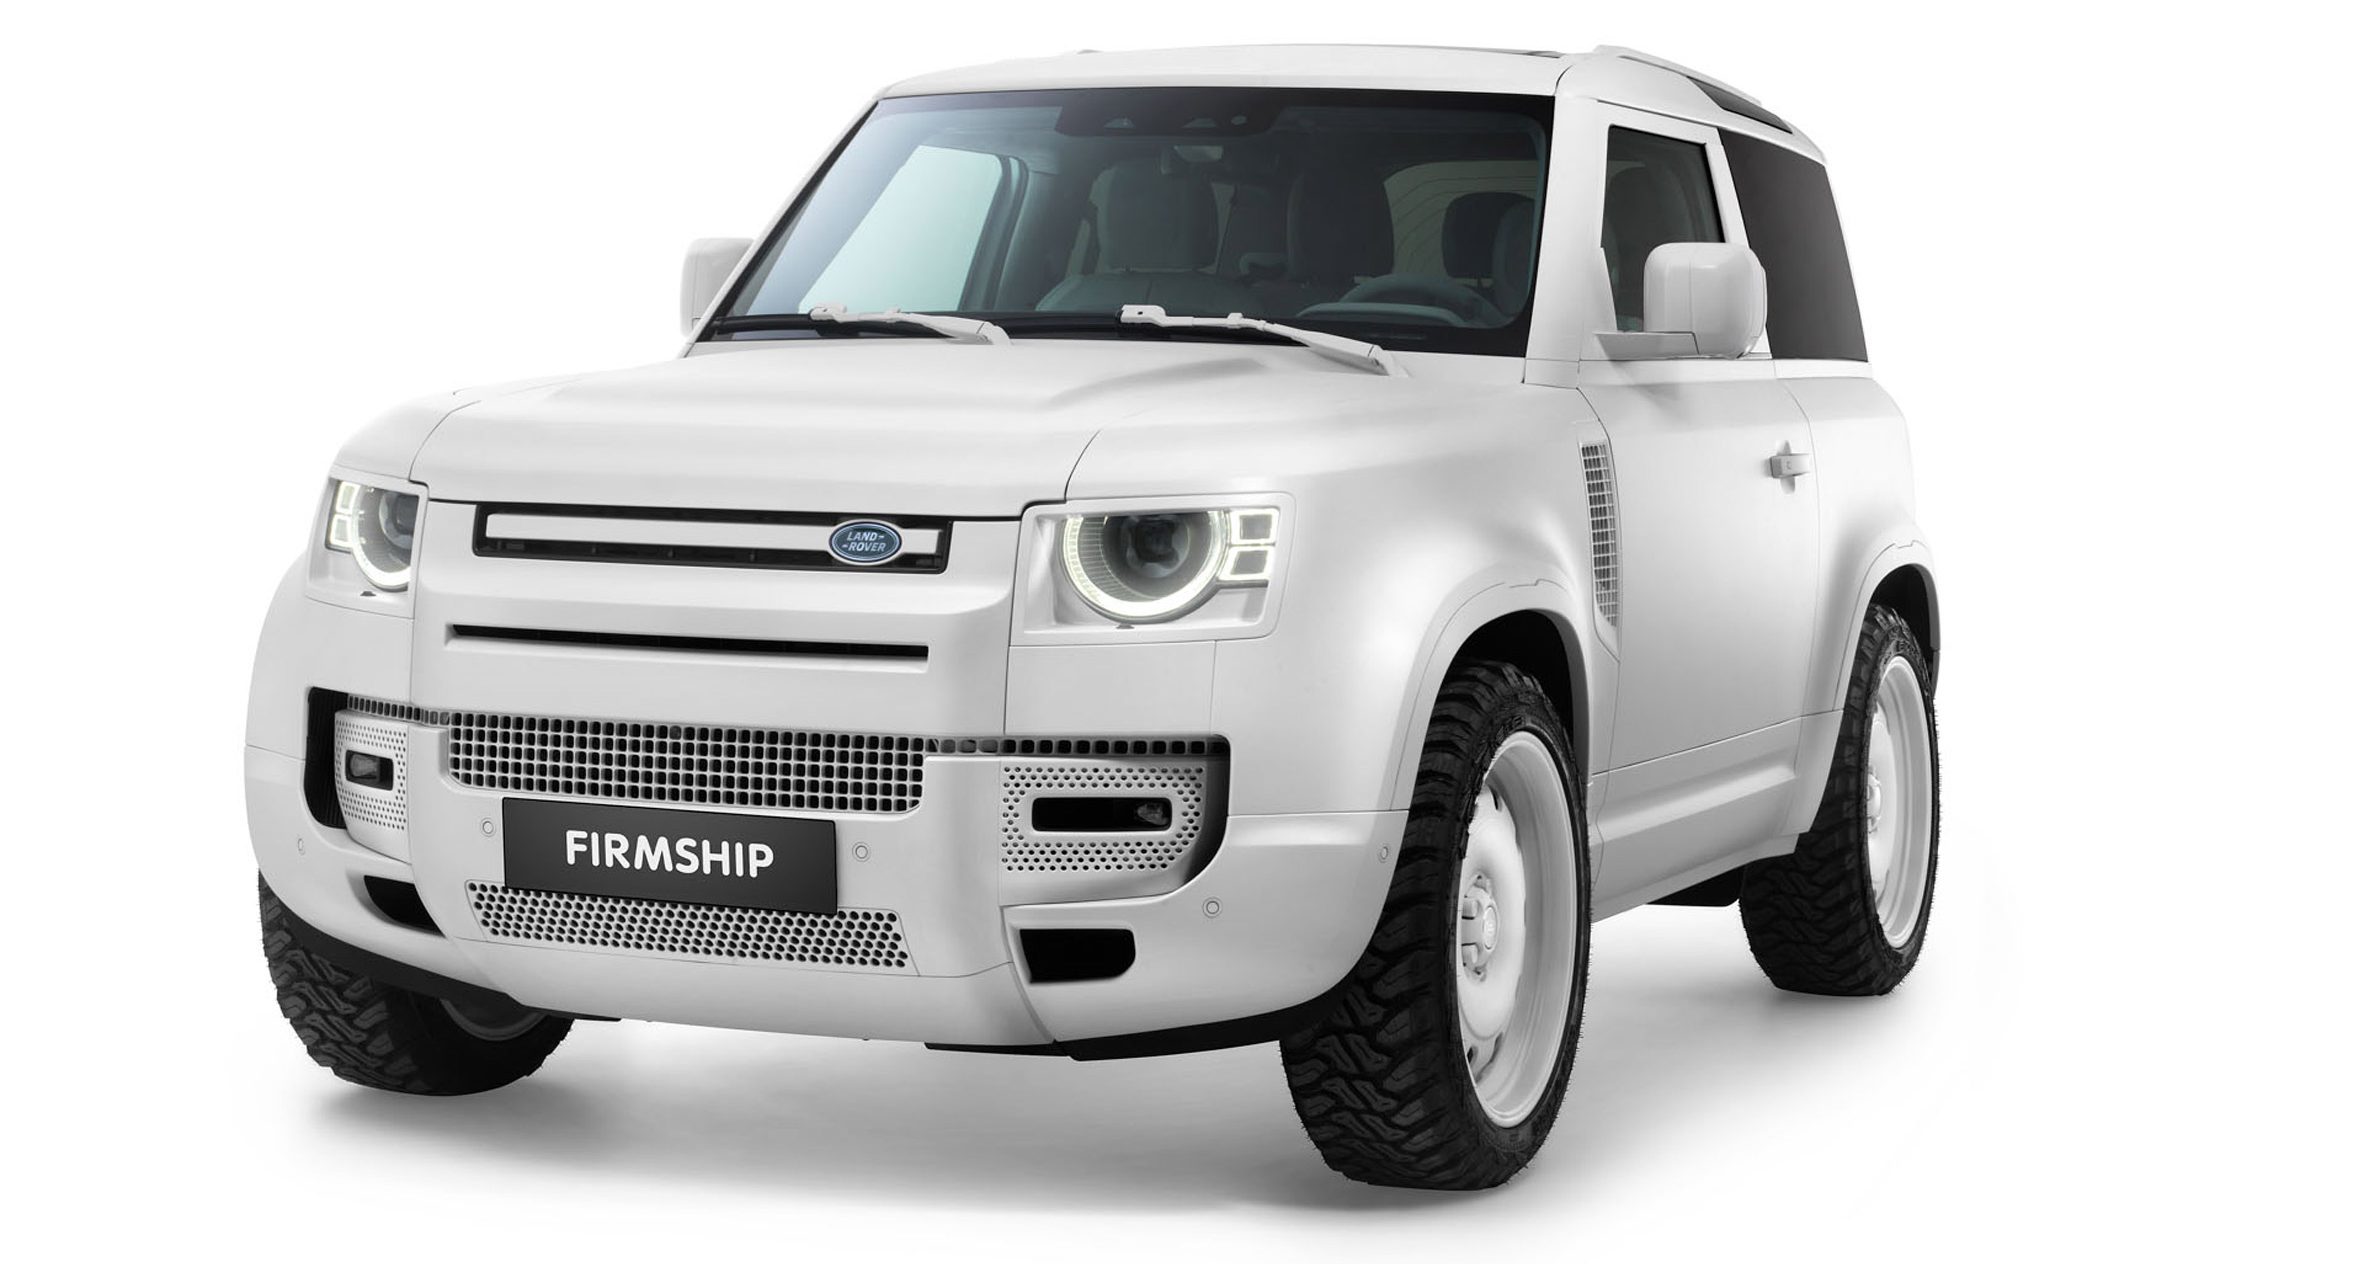 Image of the Firmship-styled Defender as seen from the front side showing monochrome minimalist styling